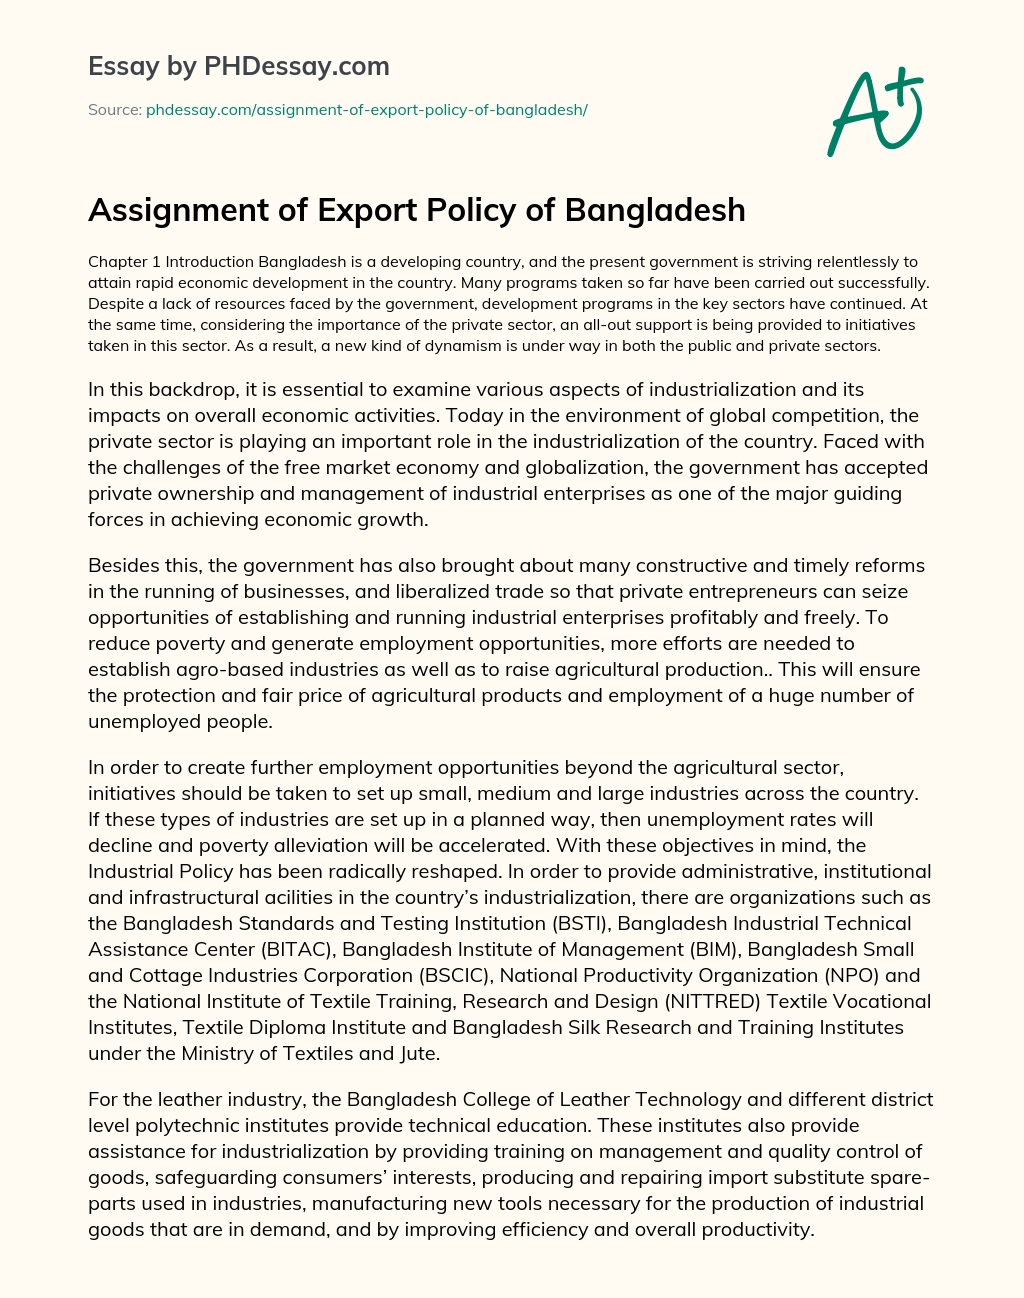 Assignment of Export Policy of Bangladesh essay